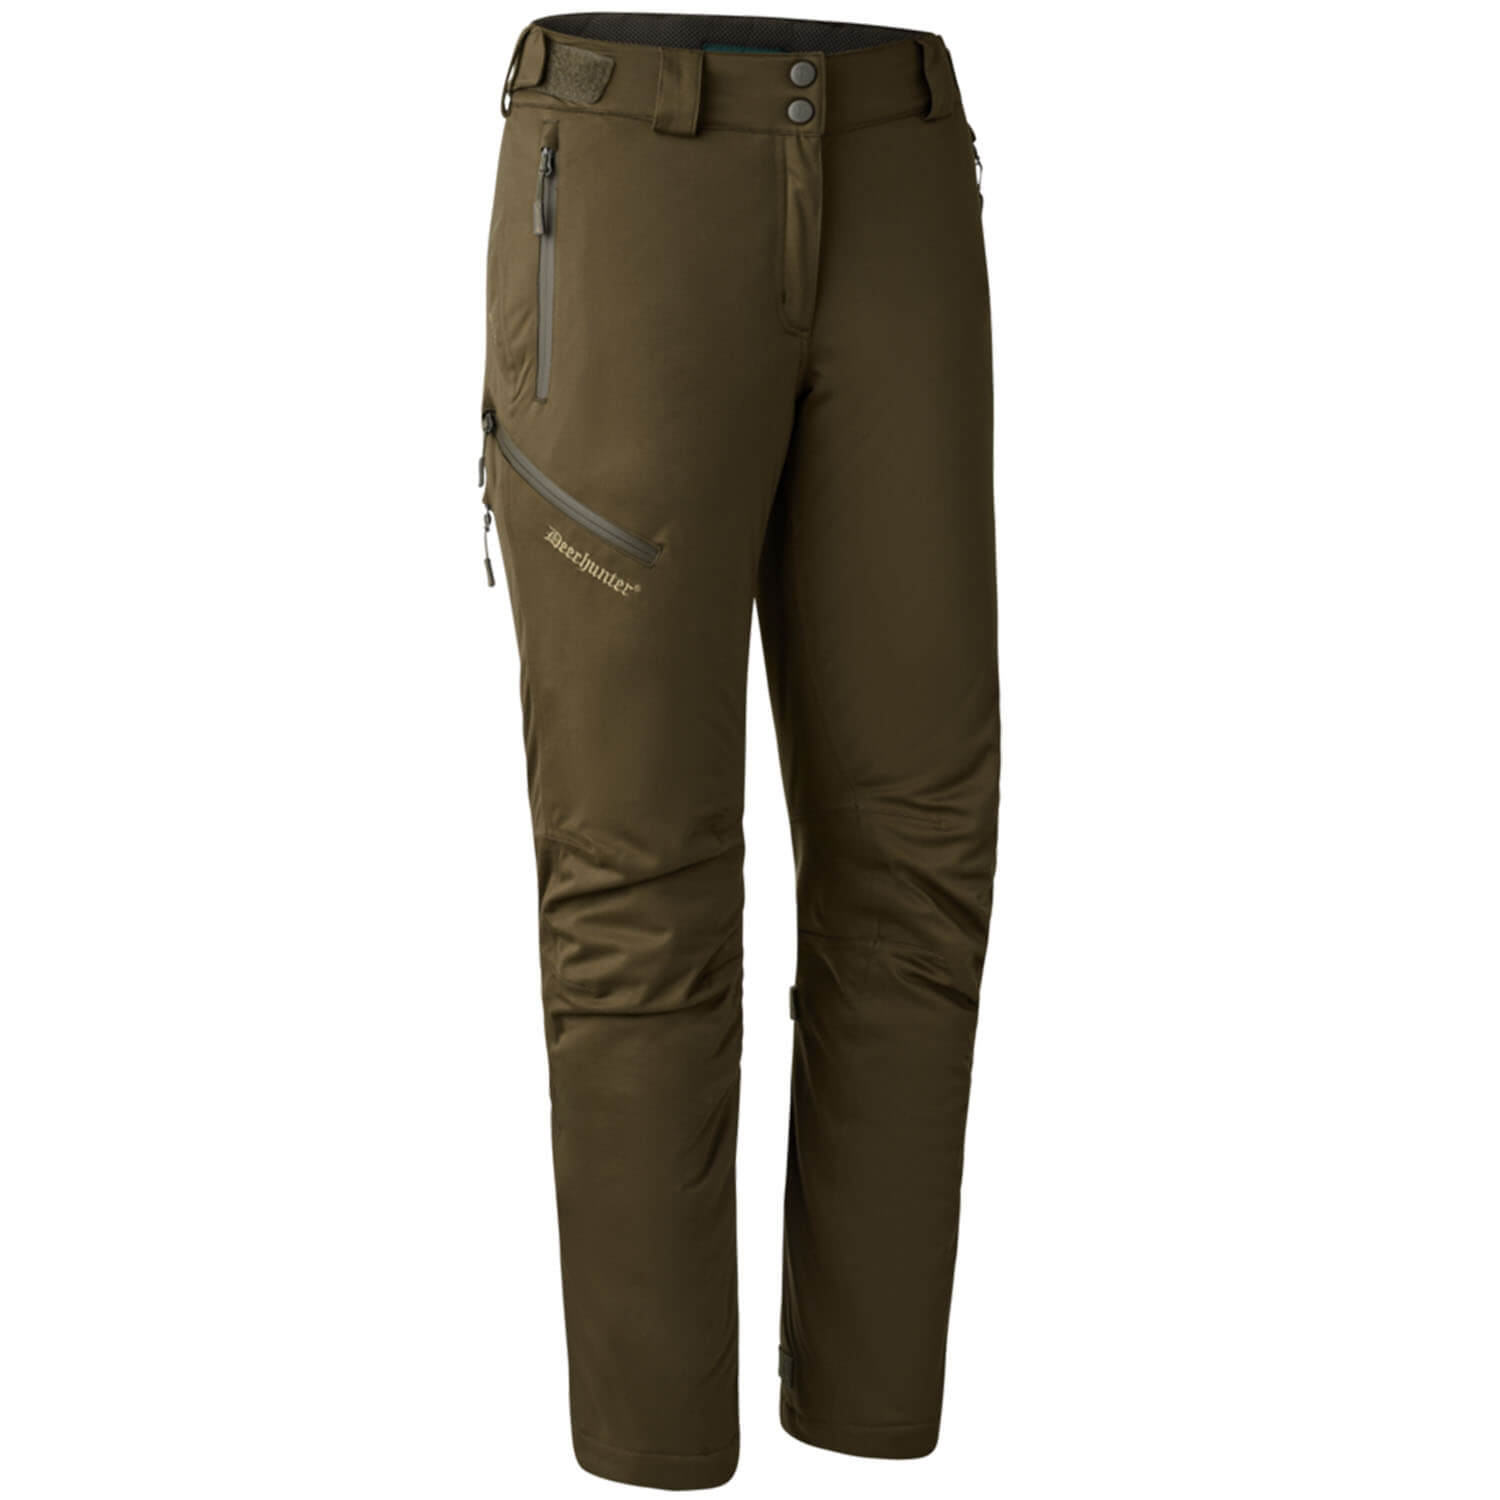 Deerhunter winter Trousers Lady Excape (grün) - Hunting Trousers